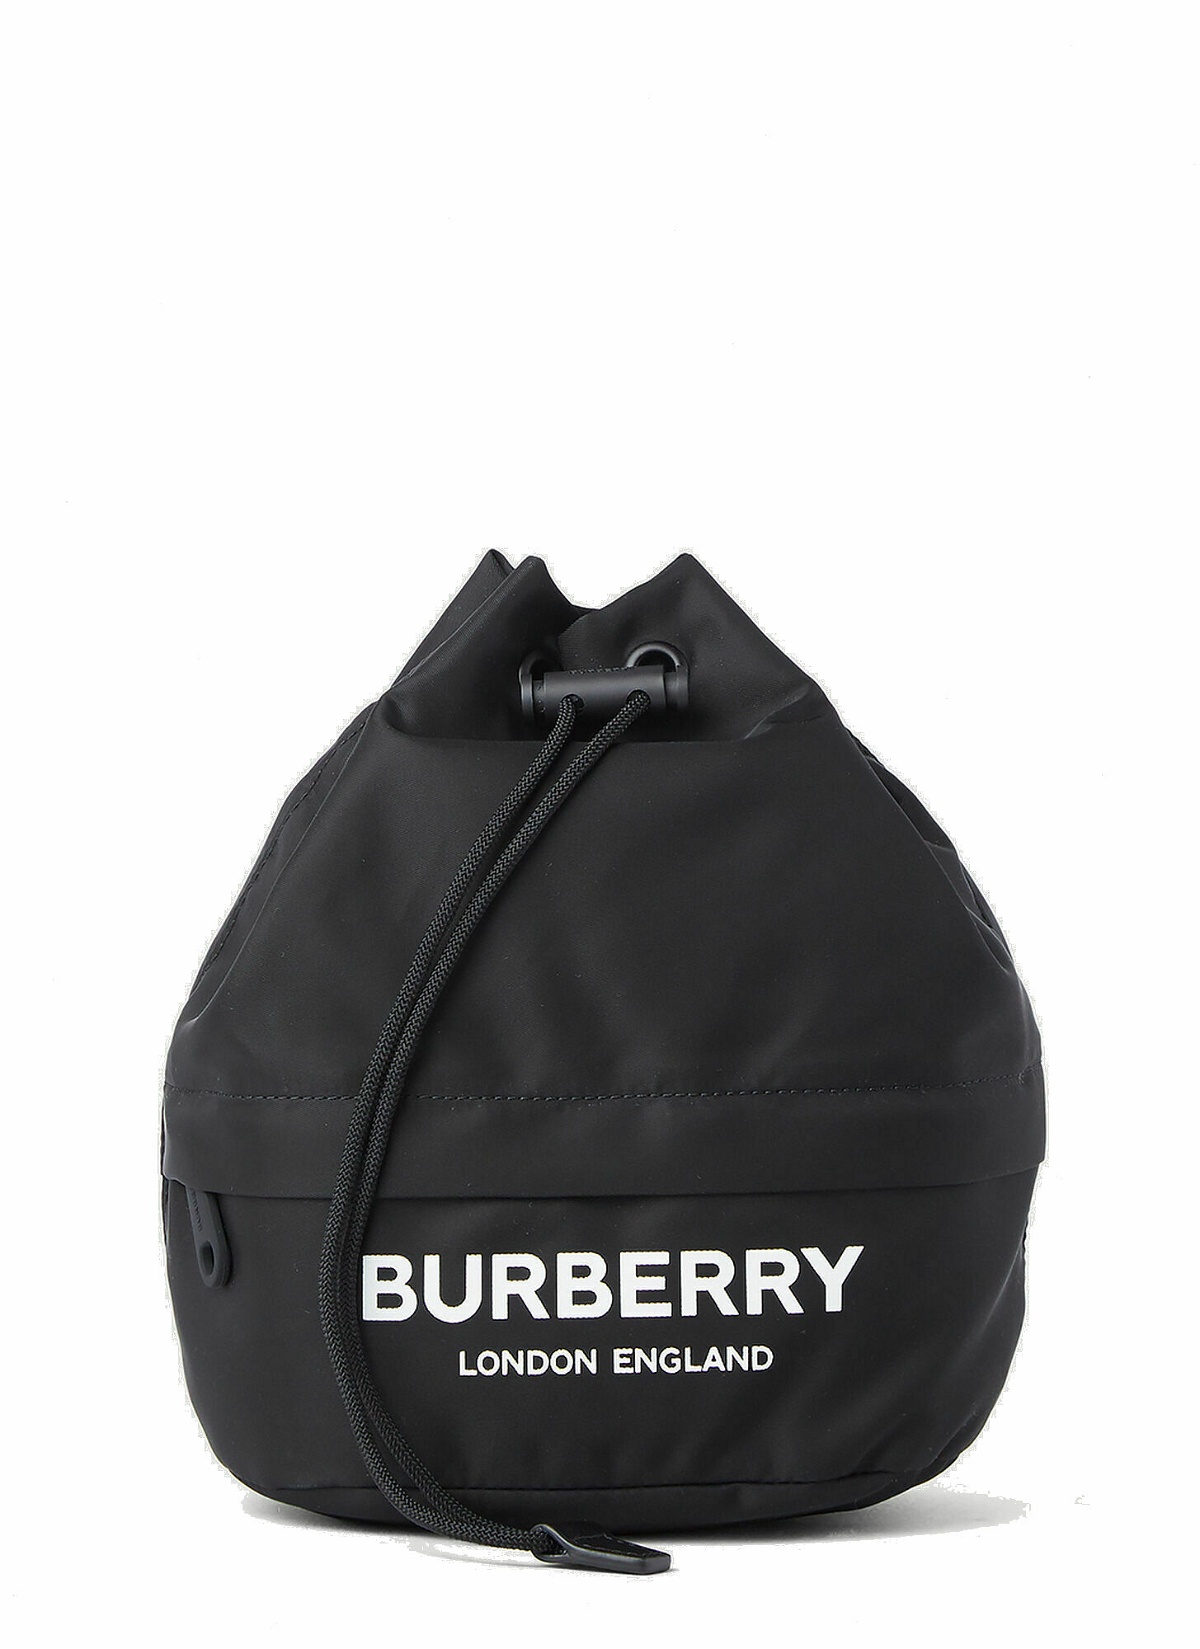 Photo: Phoebe Drawstring Pouch Bag in Black